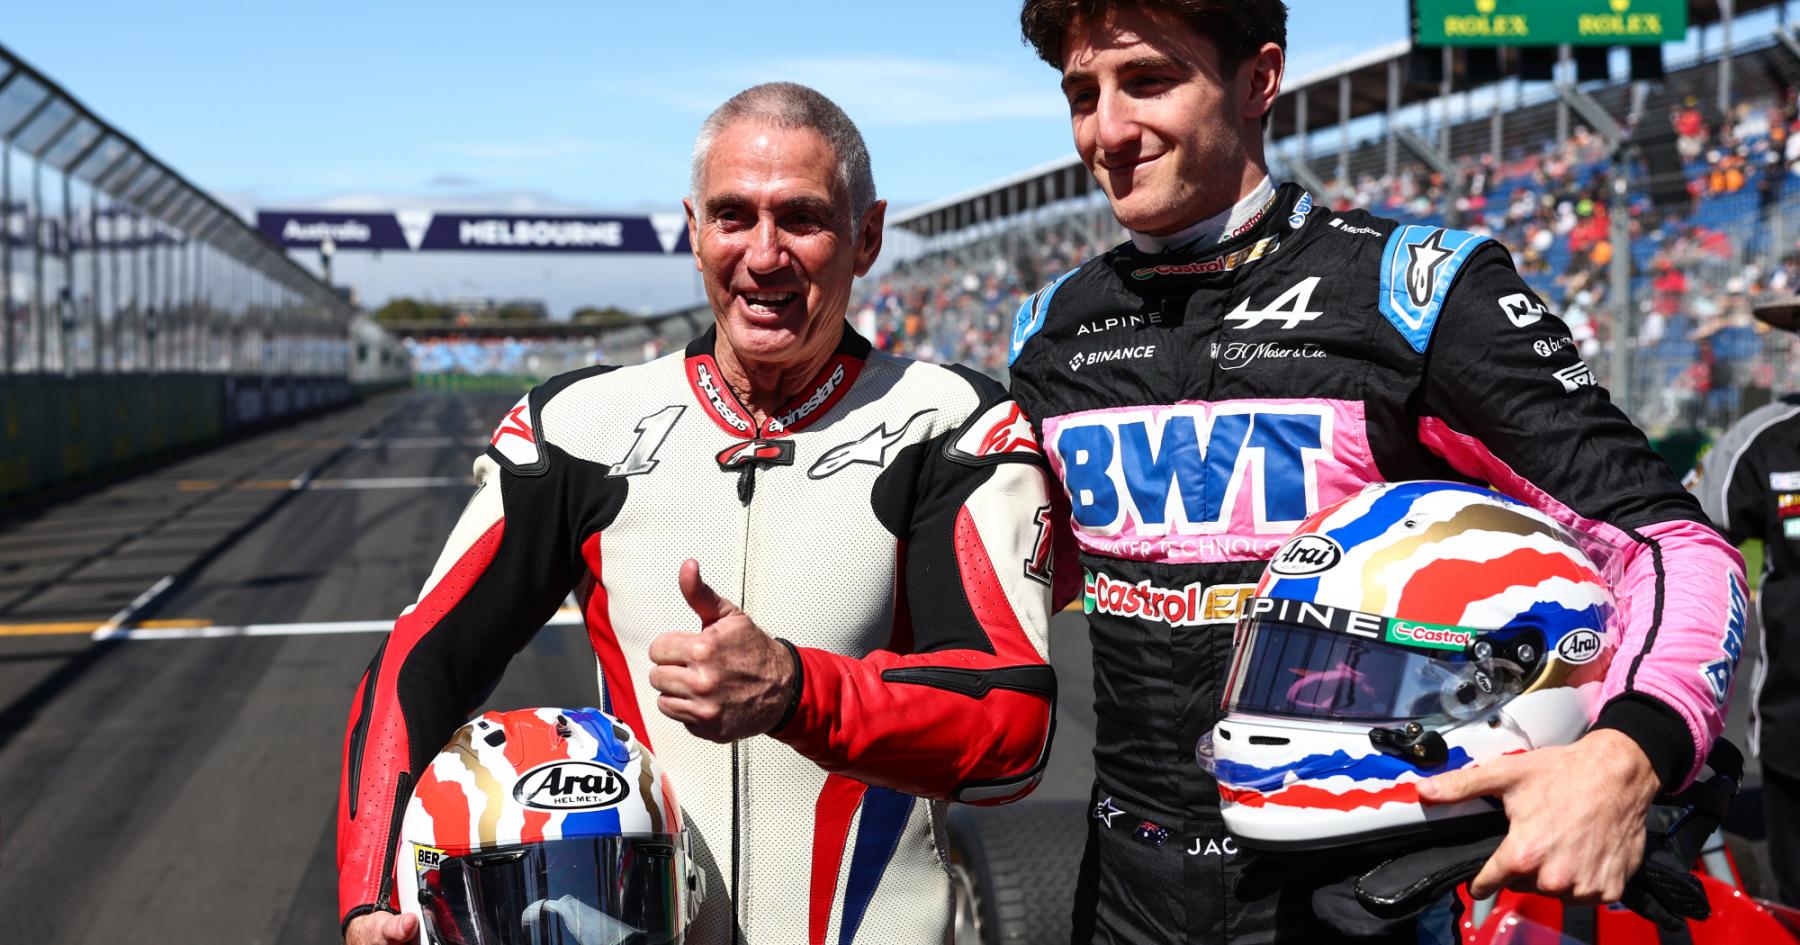 Jack Doohan: From a broken leg on a motorcycle to Formula 1